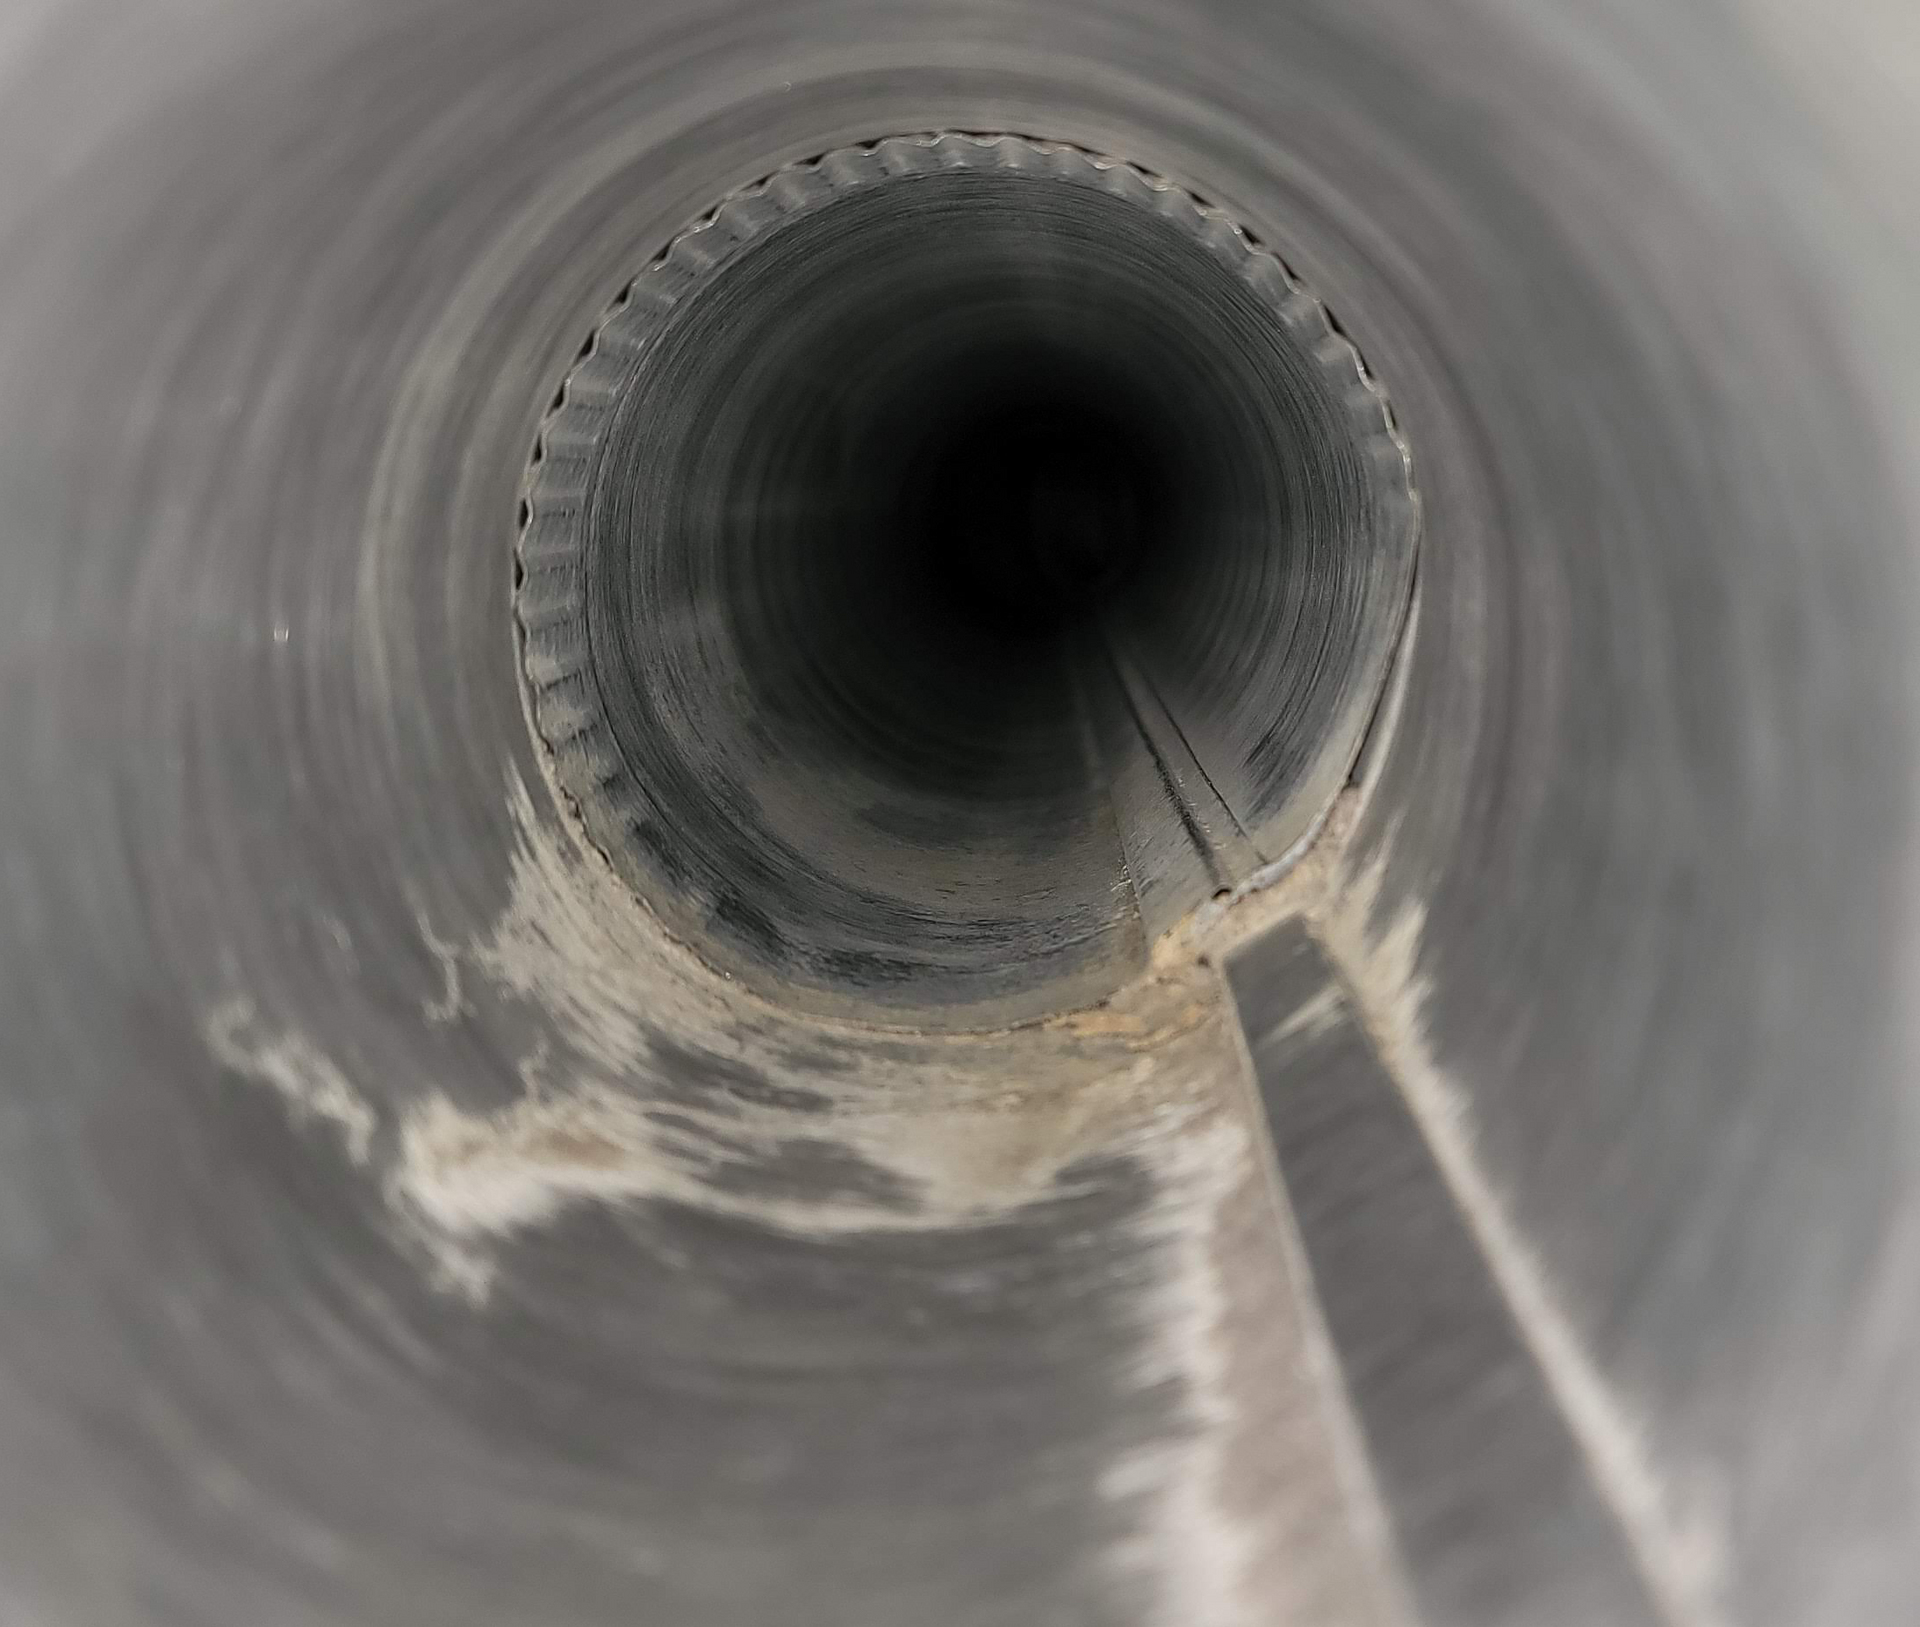 a close up of the inside of a metal pipe